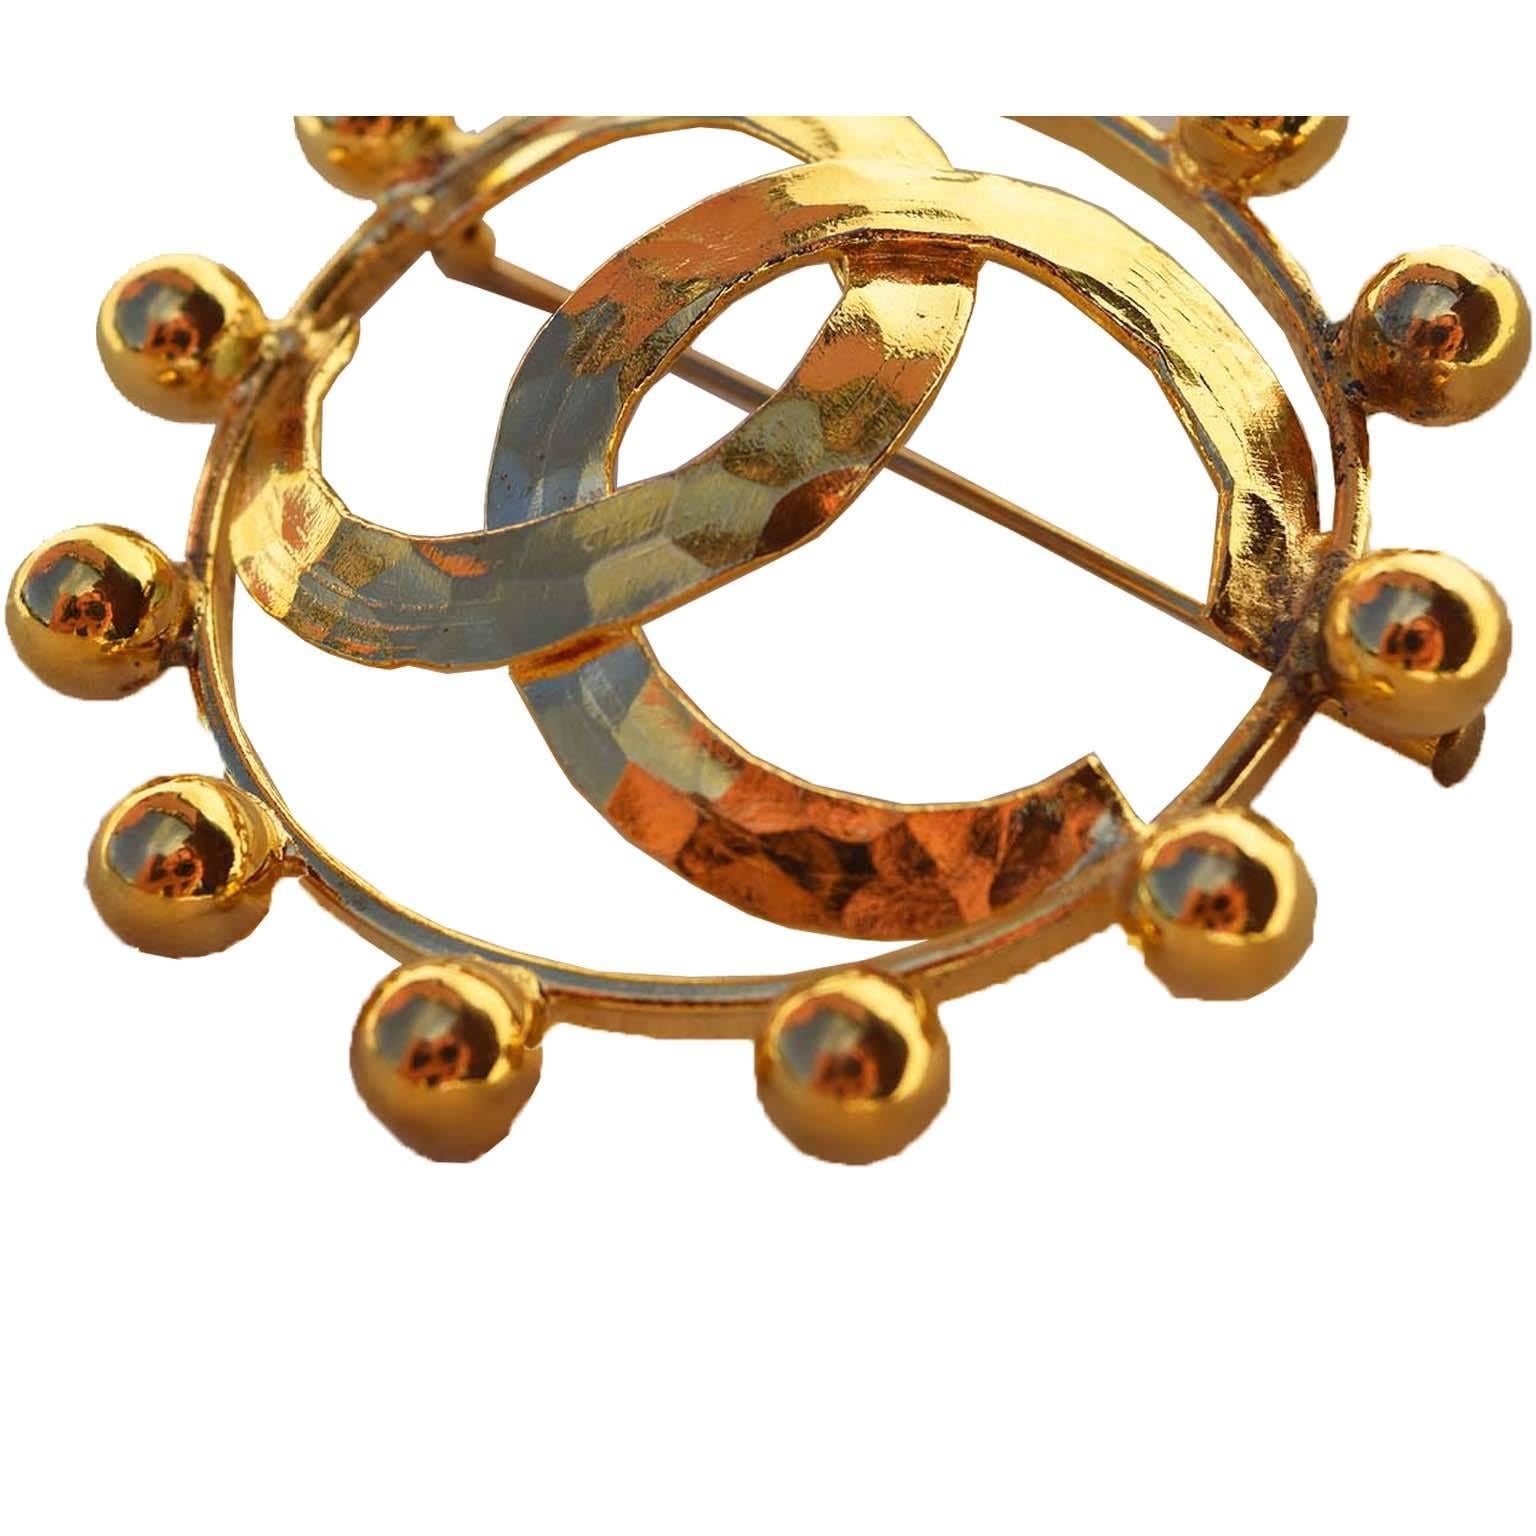 
Chanel vintage CC logo brooch. Shiny goldtone CC logo with mini globes border design. Collection 25 (1988) designed by Victoire de Castellane, who was hired by Lagerfeld to oversee the design of Chanel's costume jewellery.

Details:
Creator: